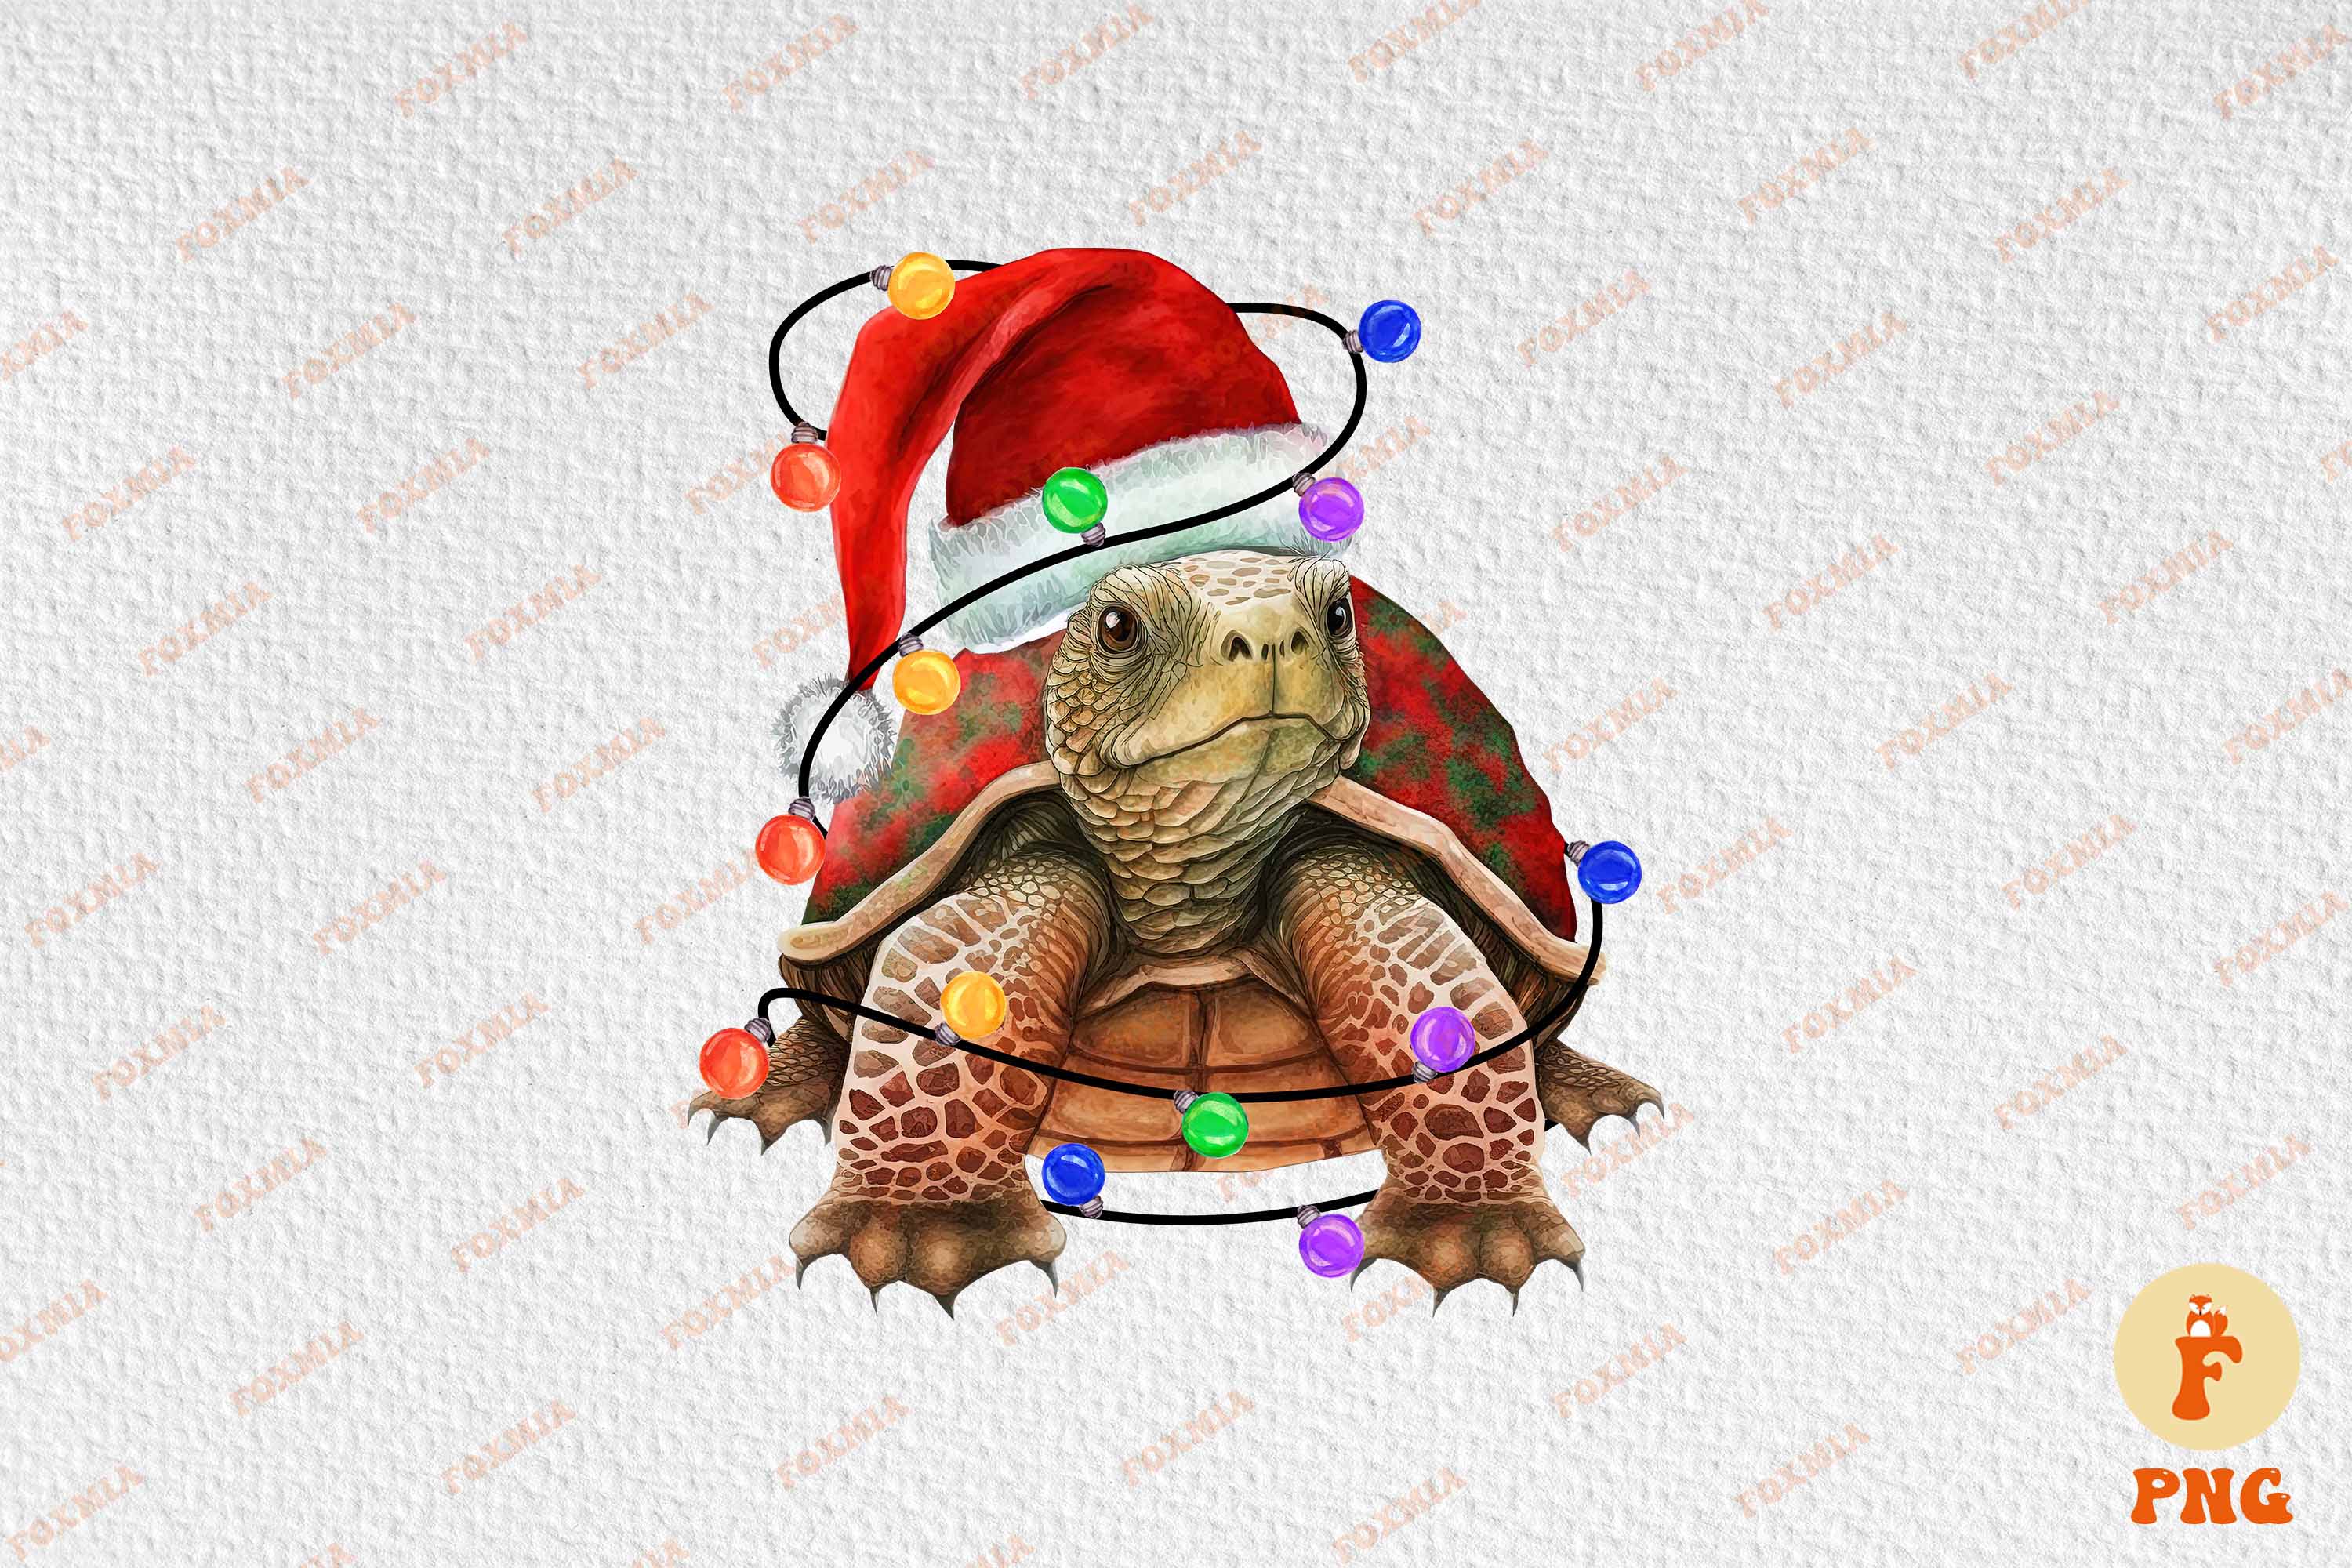 Irresistible image of a turtle in a santa hat.